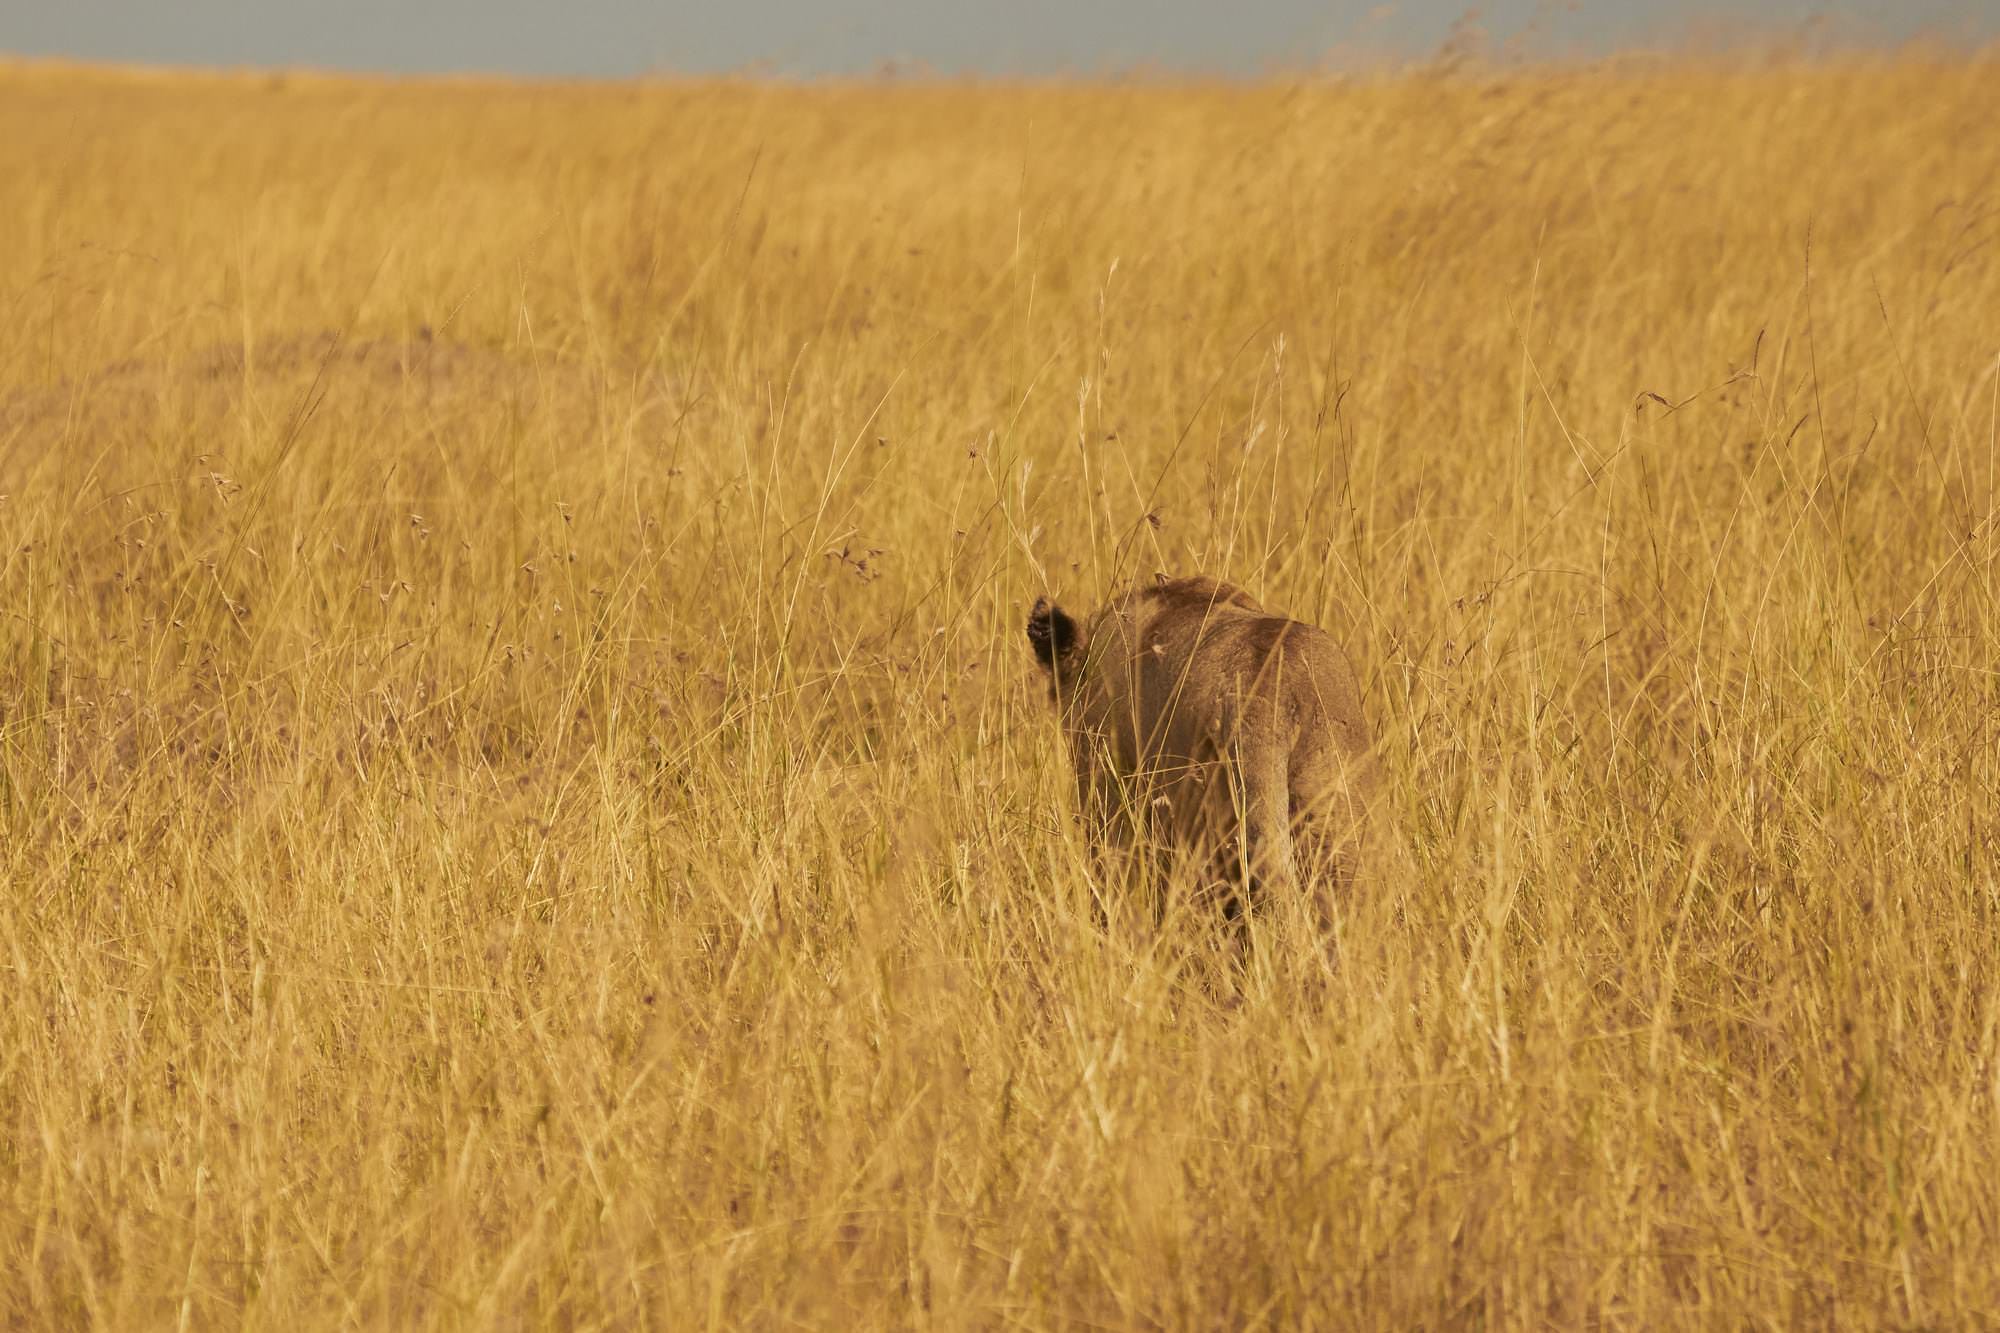 Lioness walking away into the Savannah